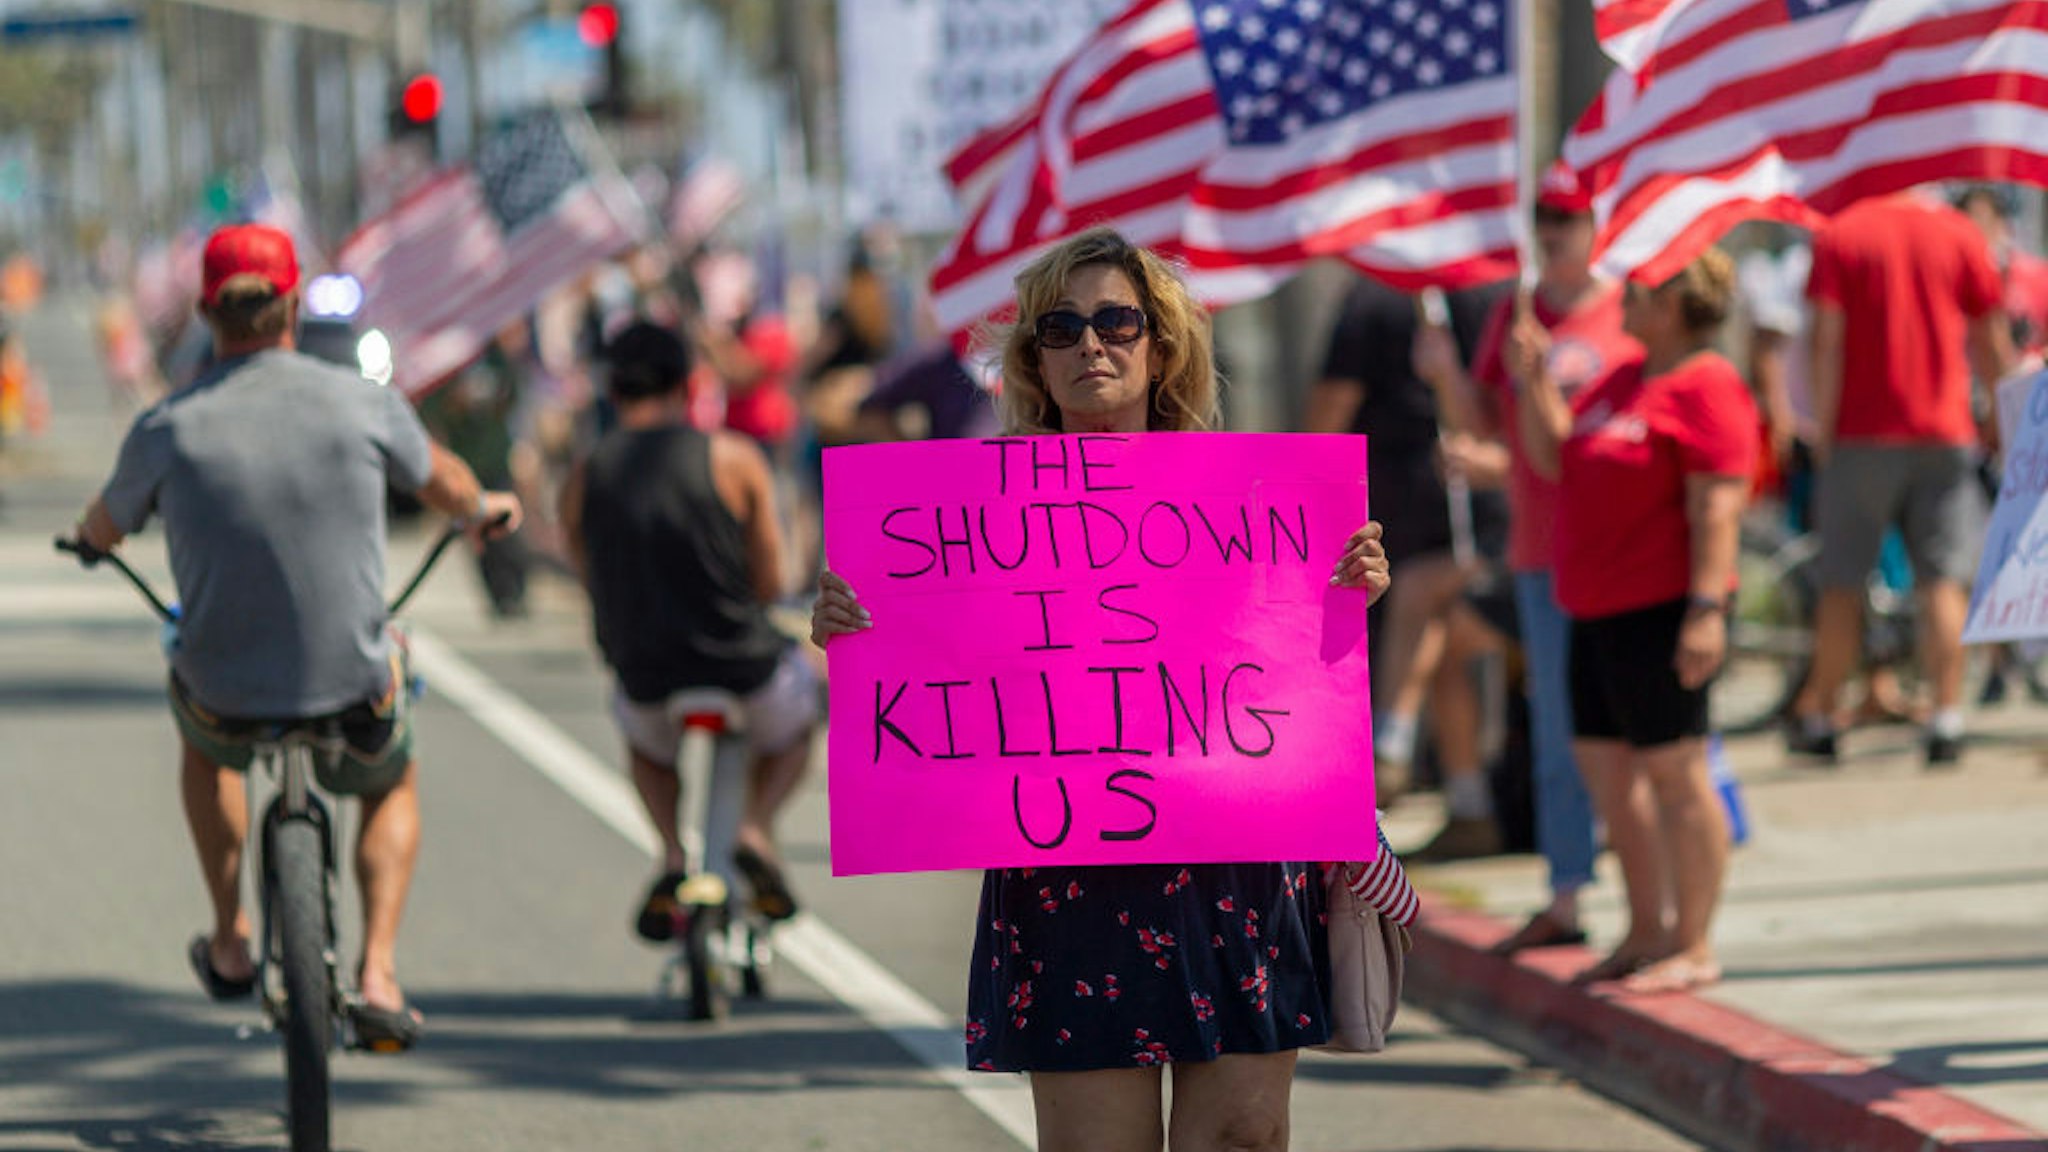 Protesters call to reopen businesses and beaches as the growing the coronavirus pandemic continues to cripple the economy on May 1, 2020 in Huntington Beach, California.